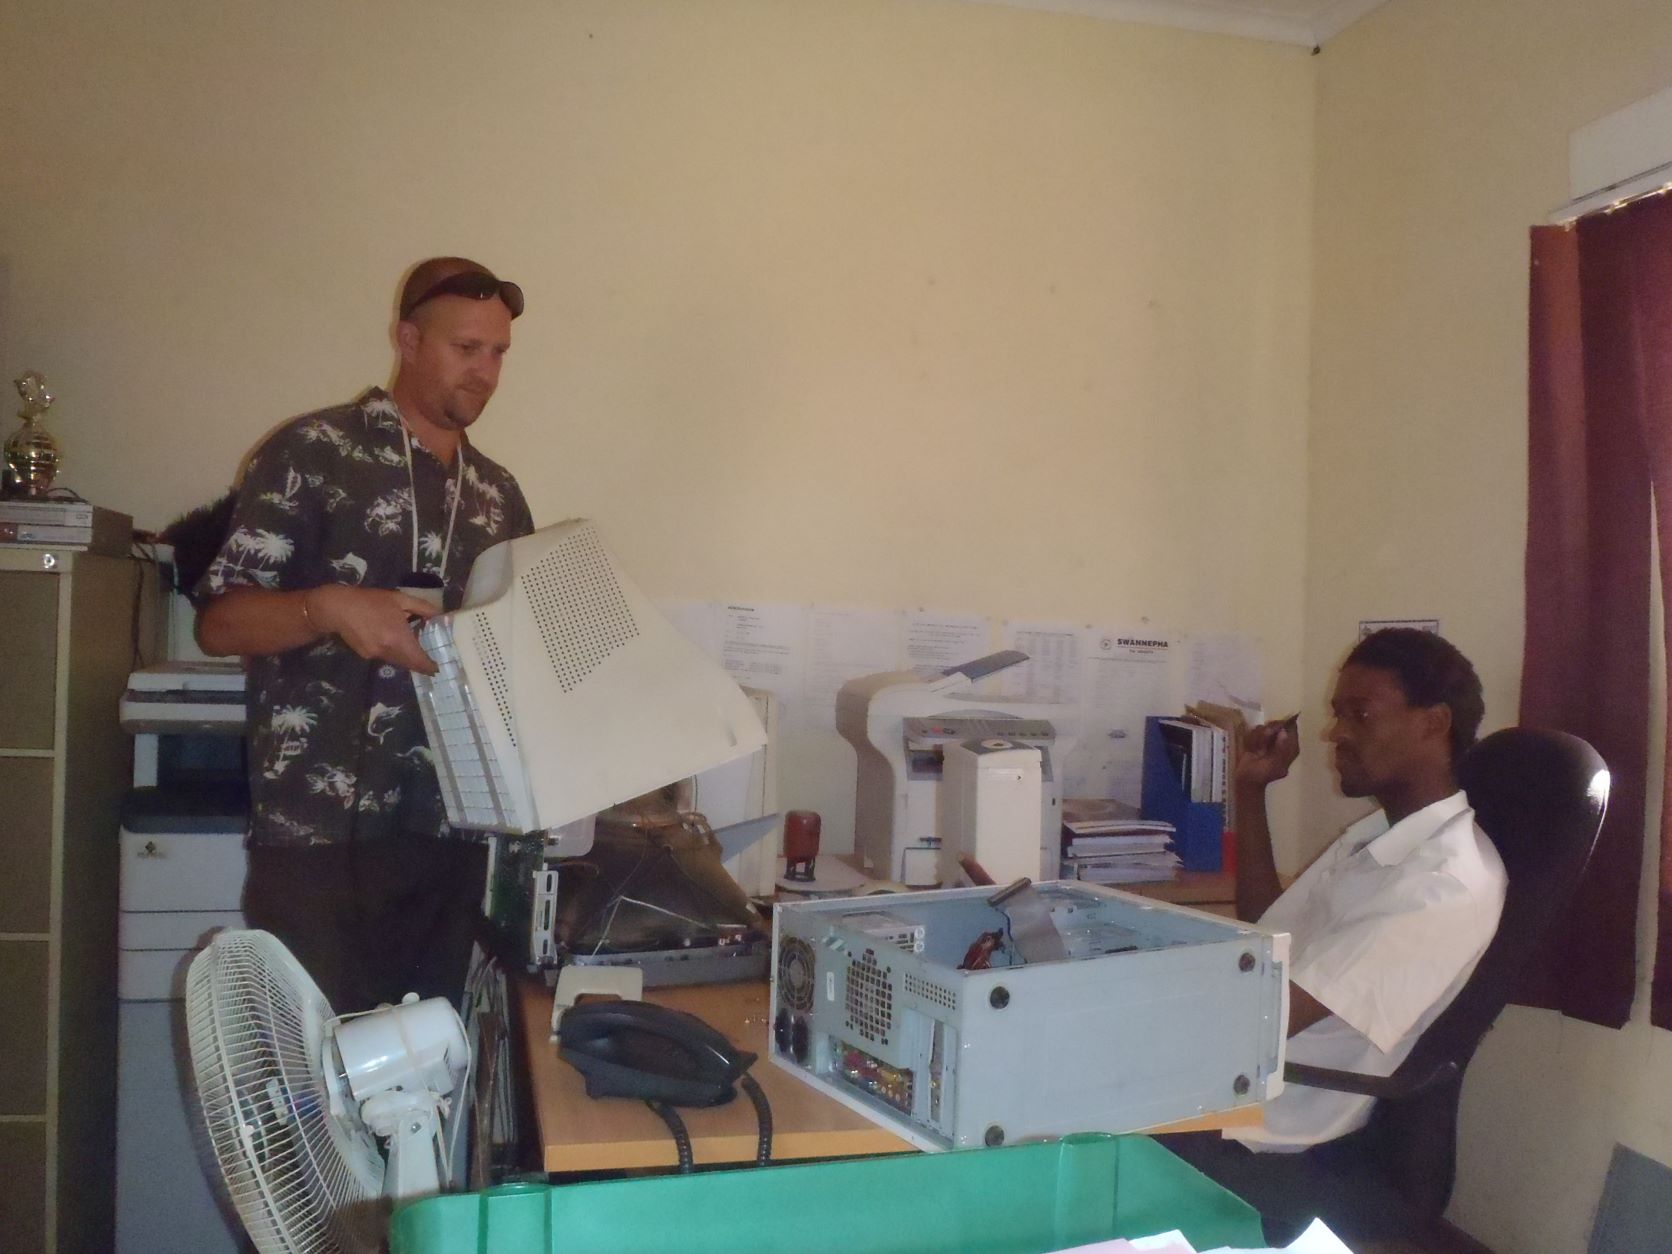 Brian and Sikhumbuzo working on a computer